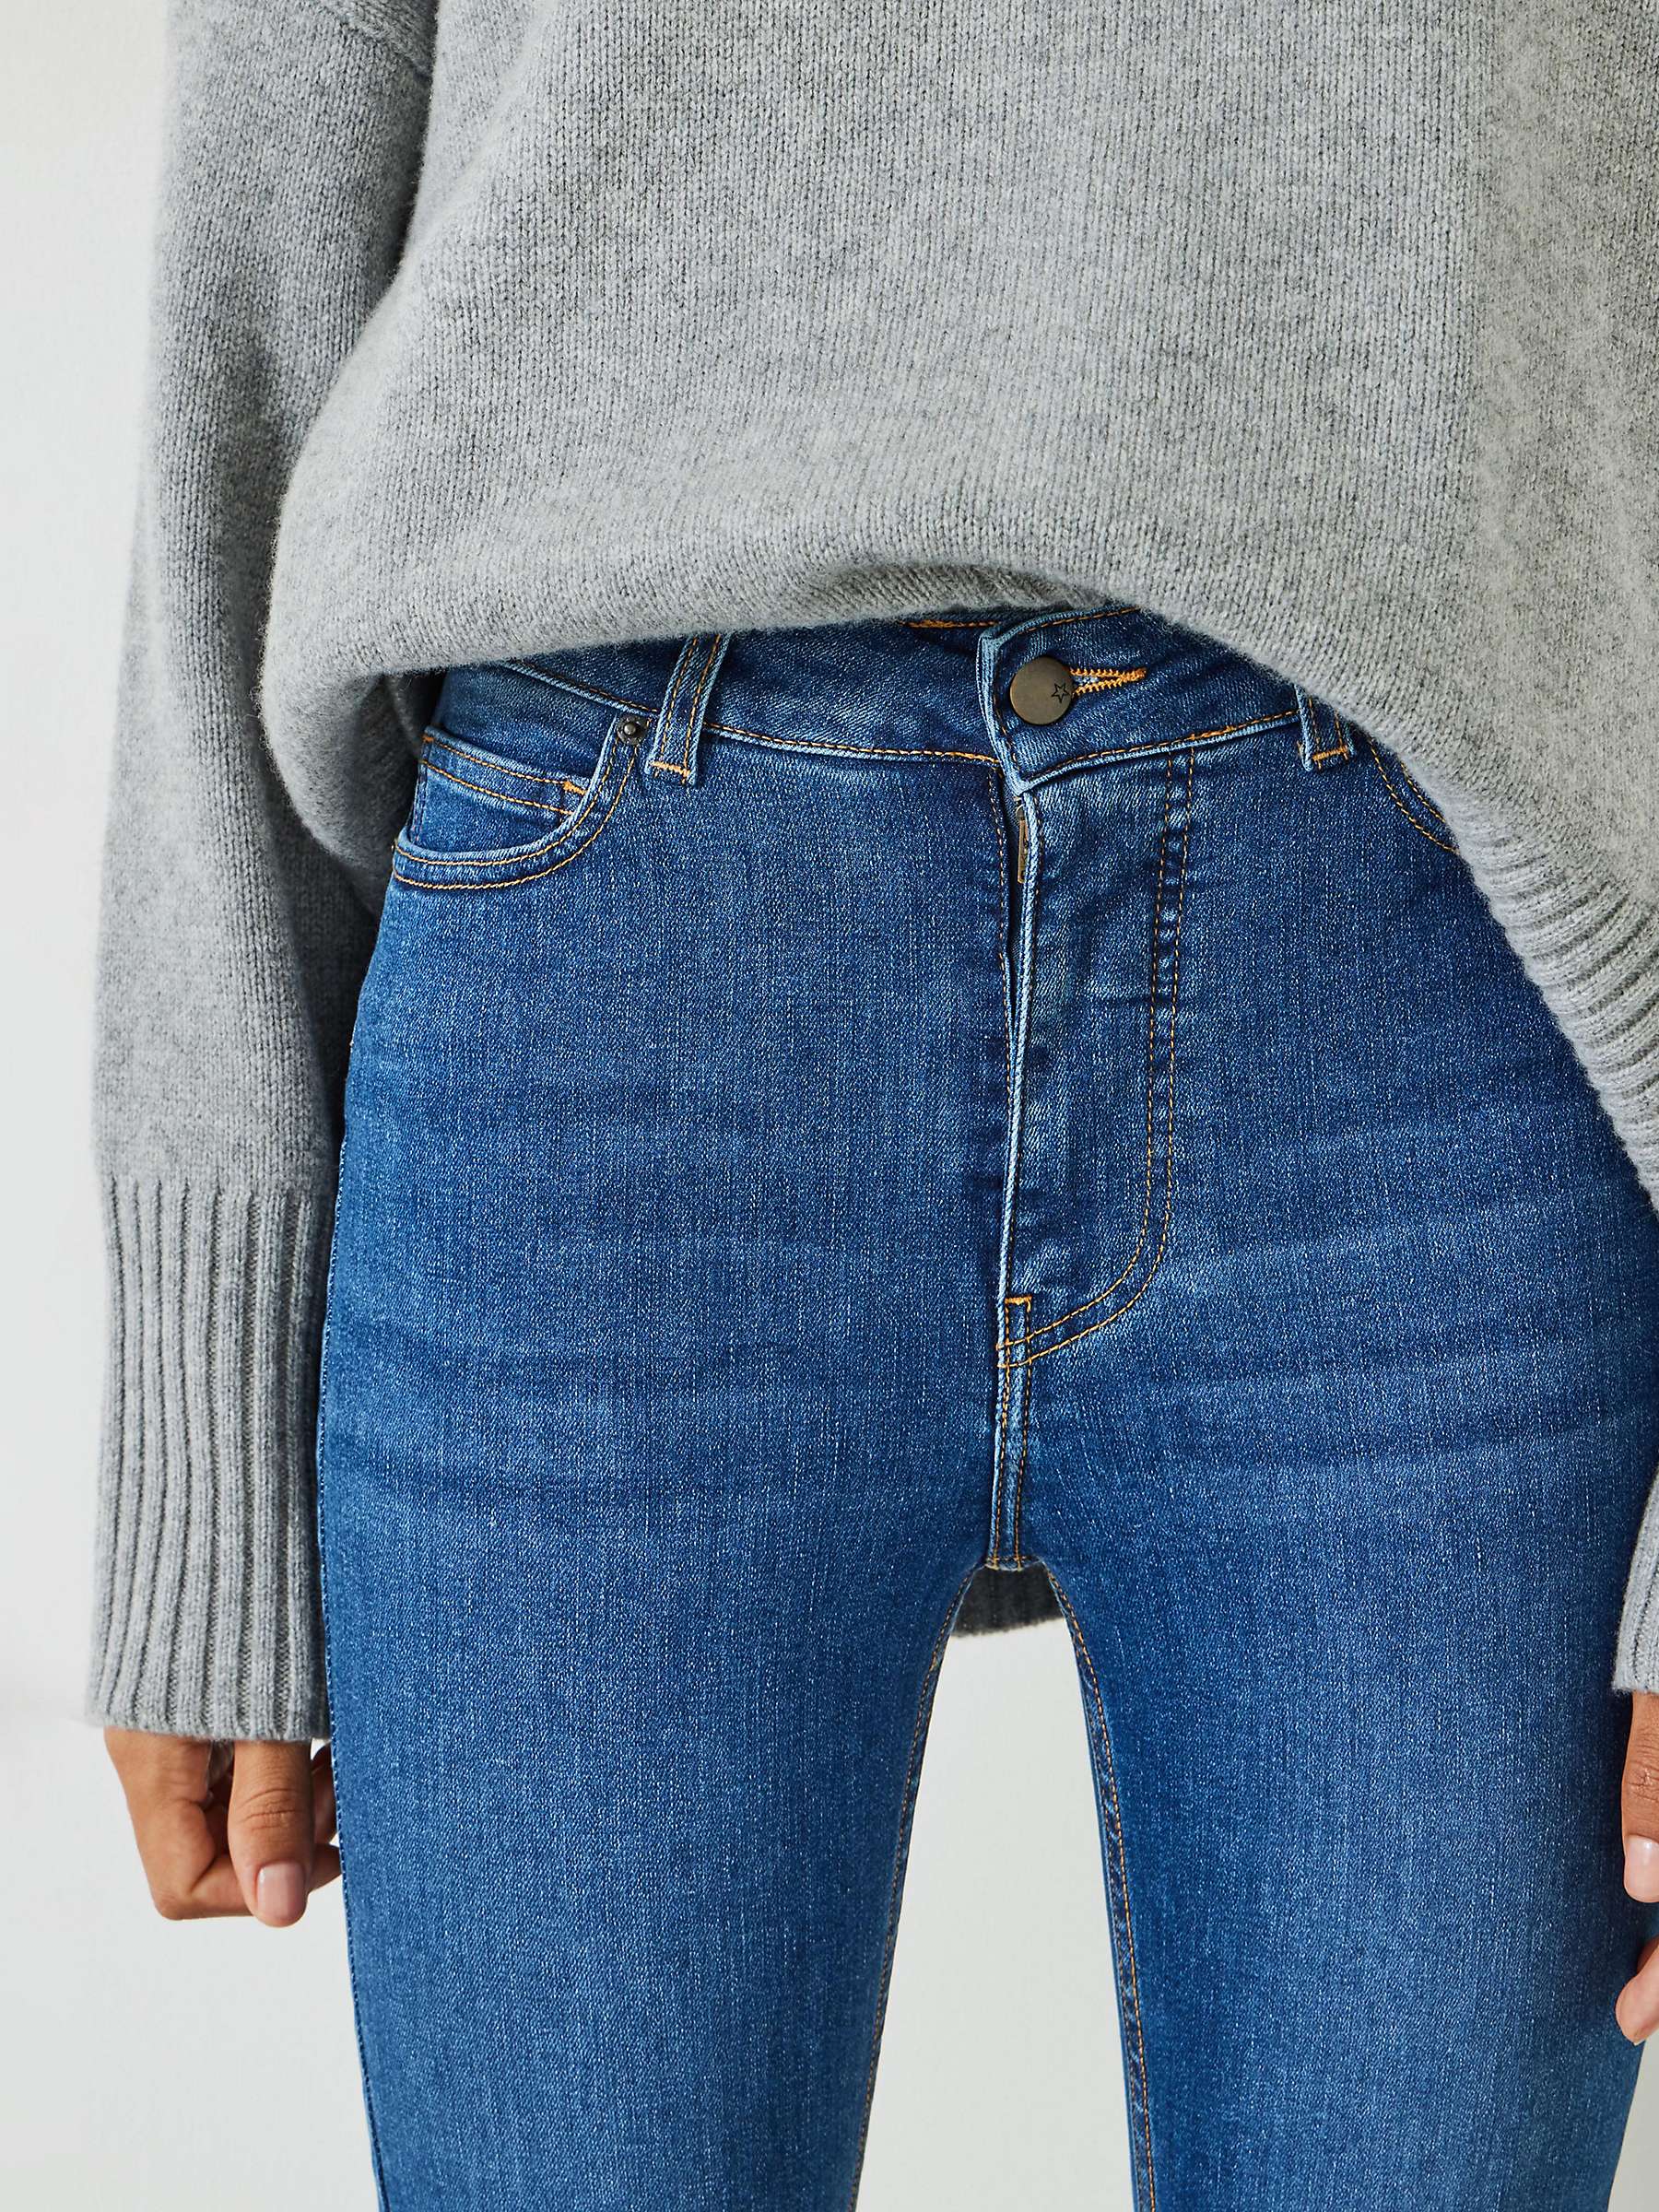 HUSH Erin Skinny Jeans, Blue Authentic at John Lewis & Partners